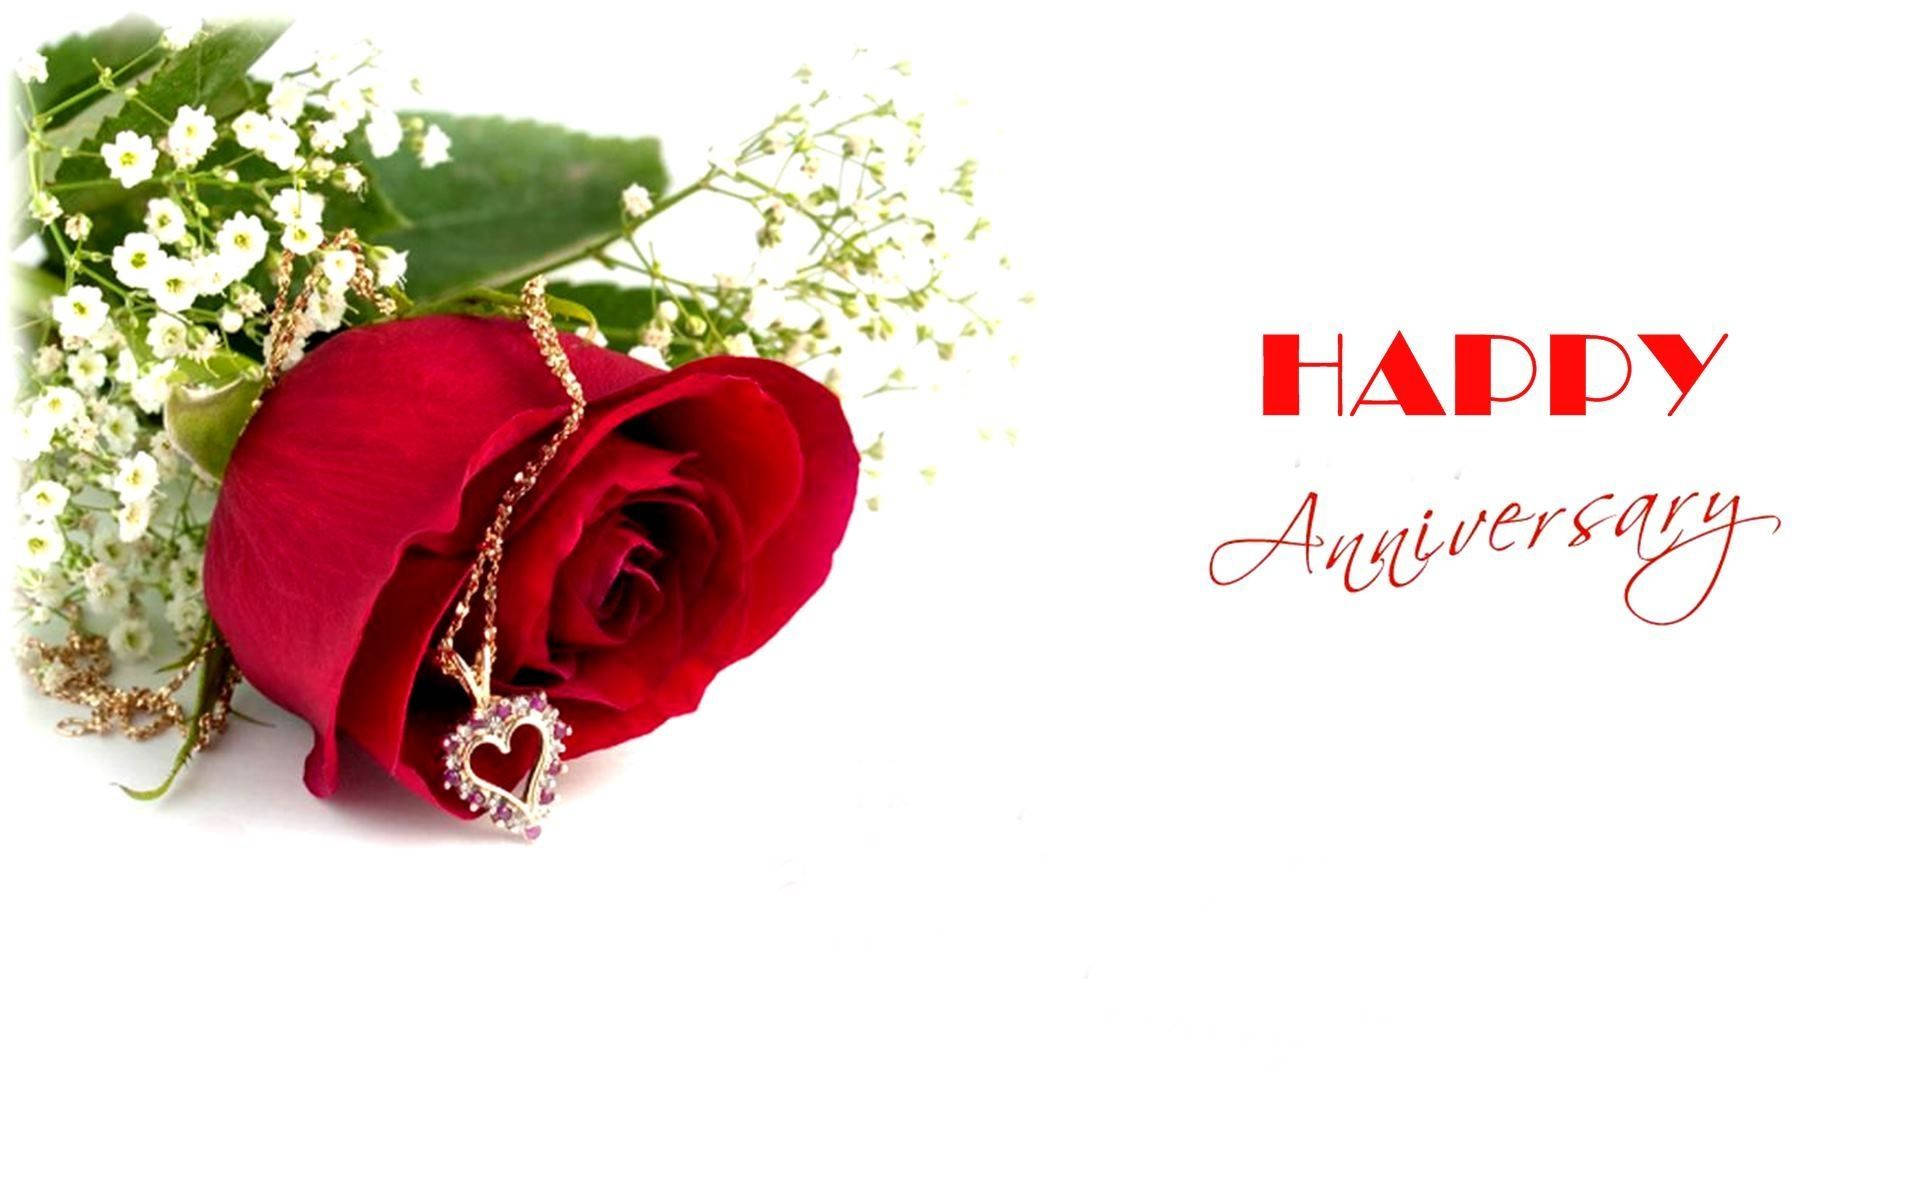 Happy Anniversary Message With Red Rose